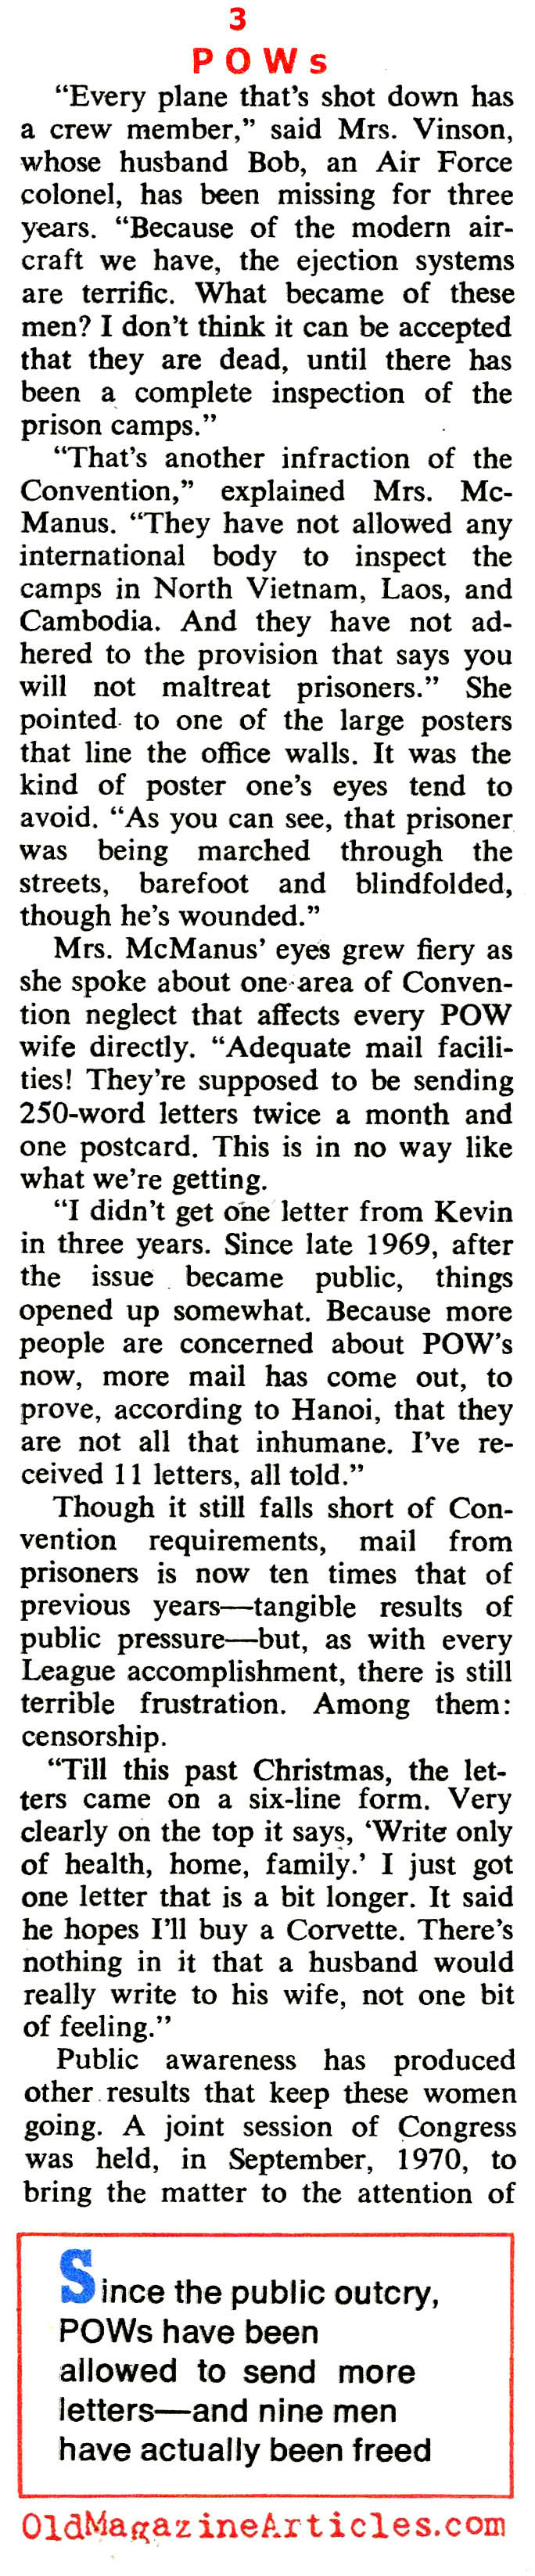 American POWs and the Wives They Left Behind (Coronet Magazine, 1971)